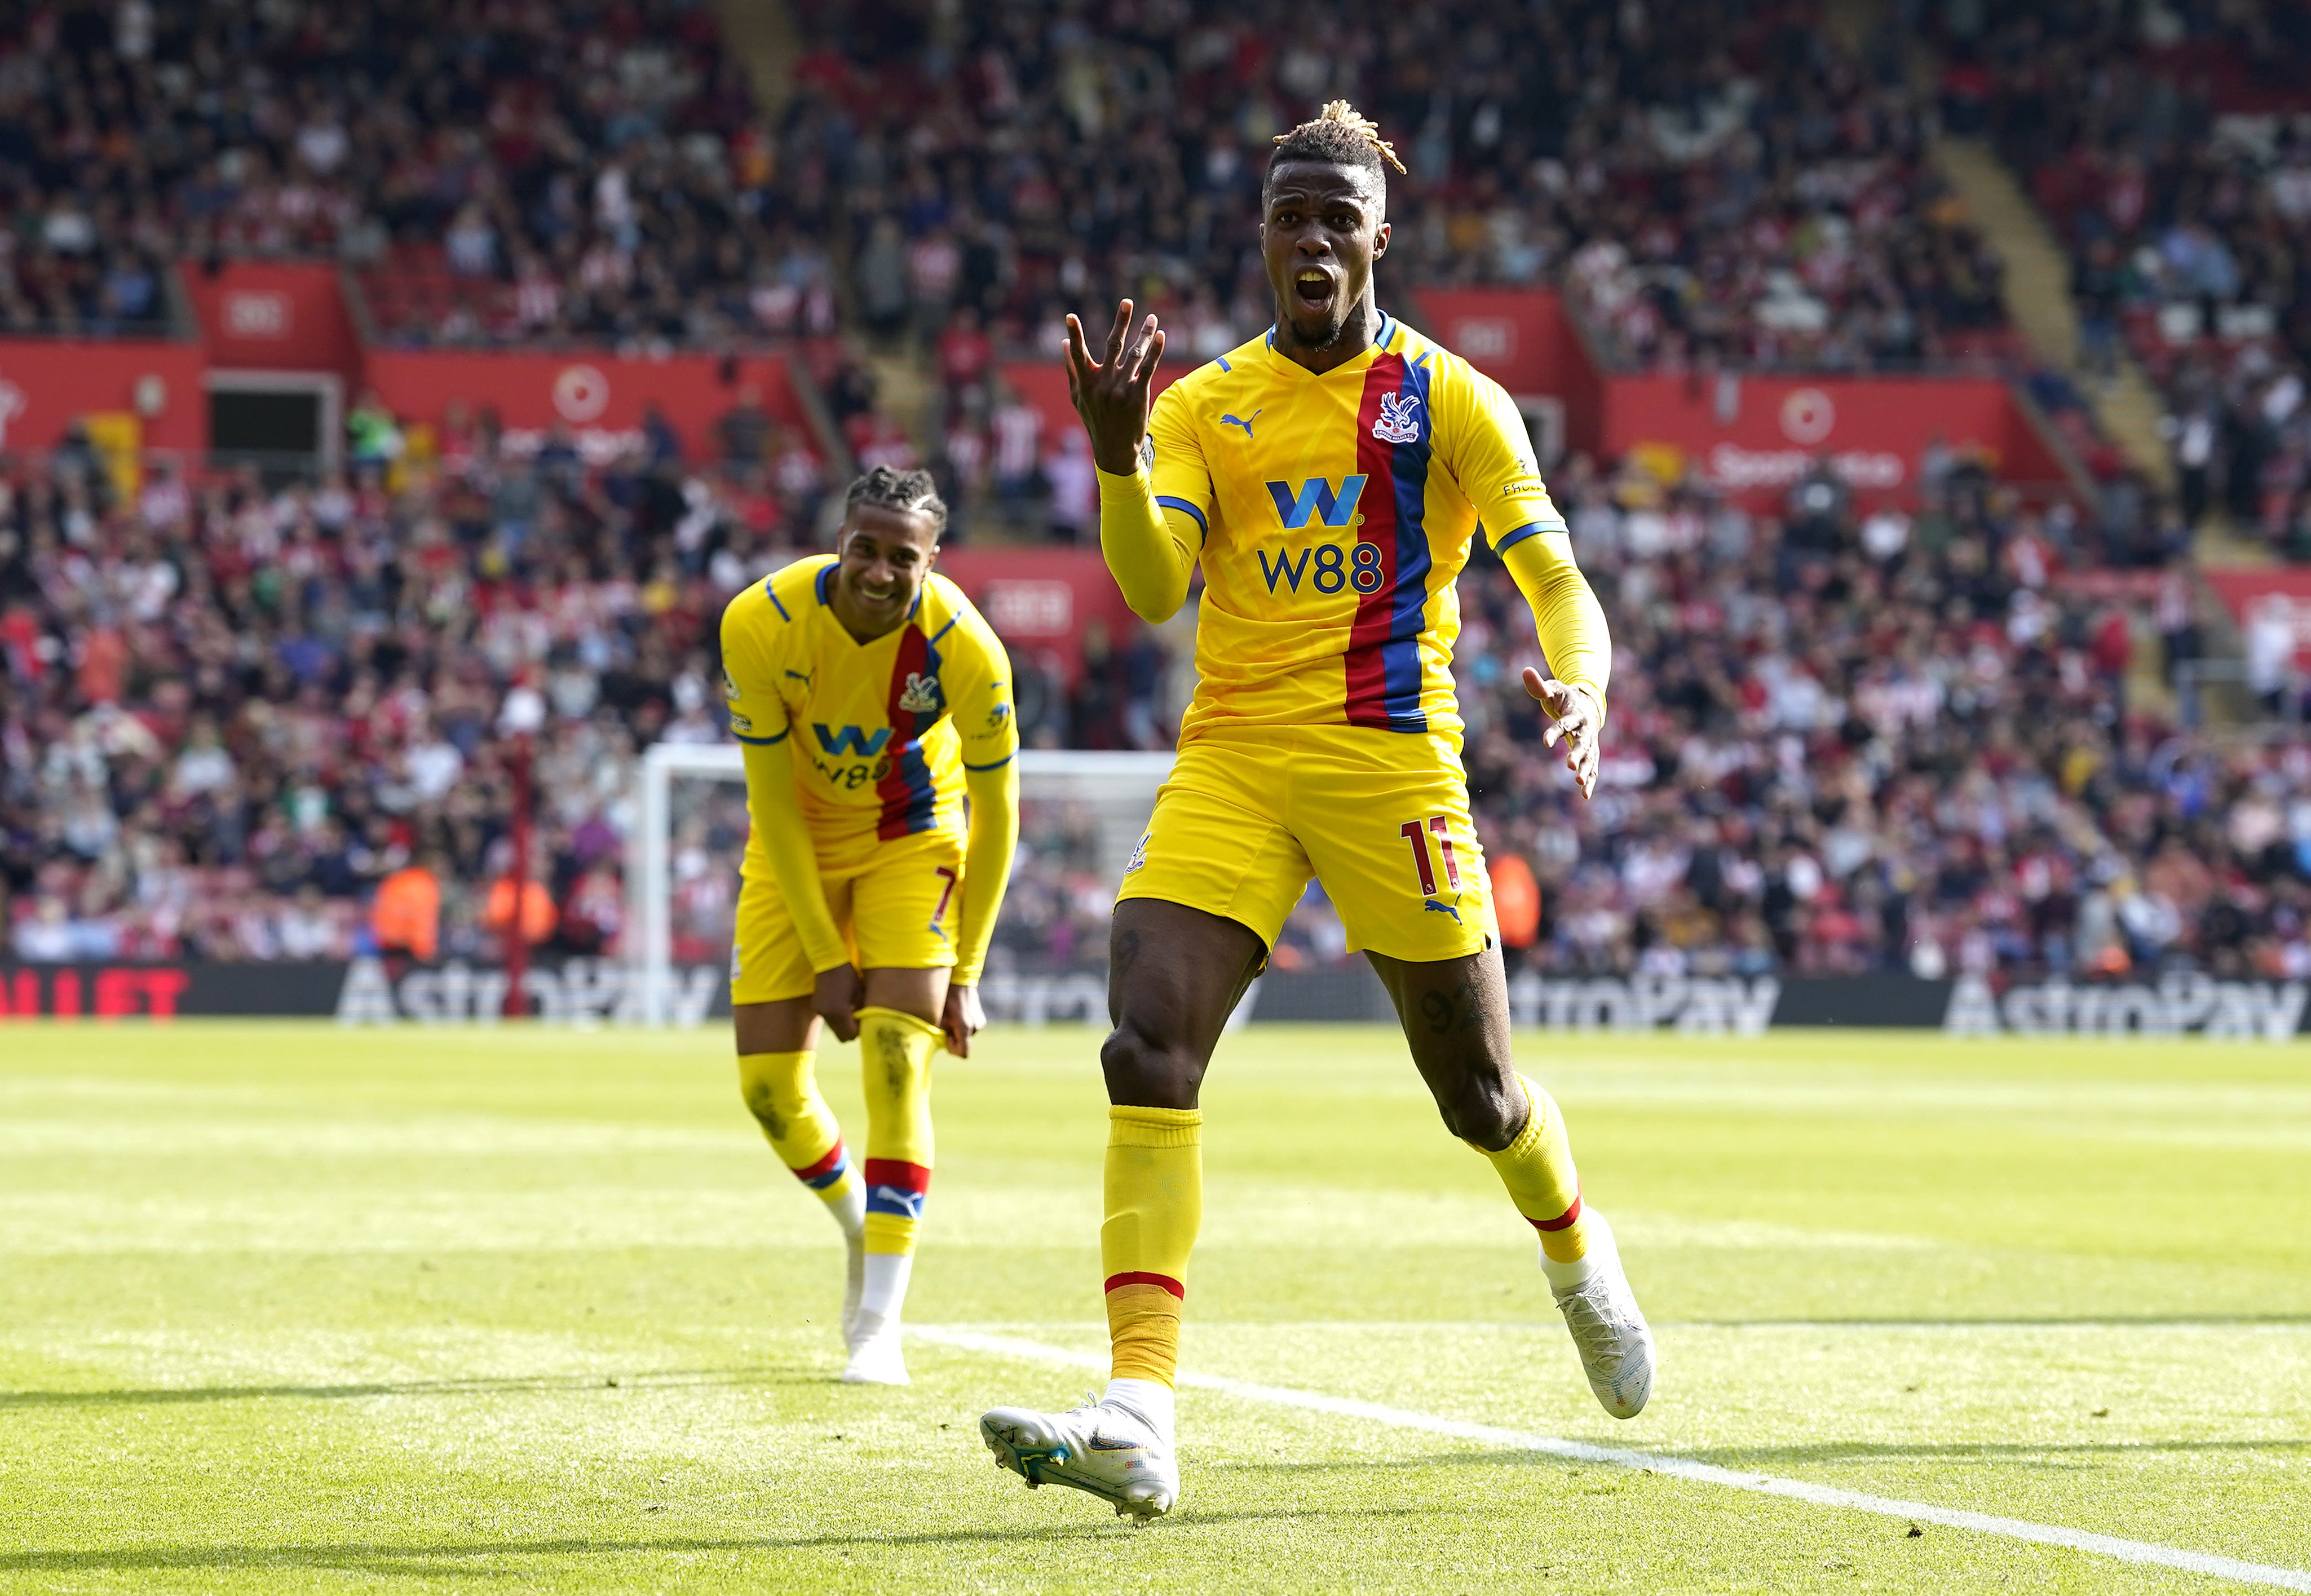 Wilfried Zaha came off the bench to score a stoppage-time winner (Andrew Matthews/PA)